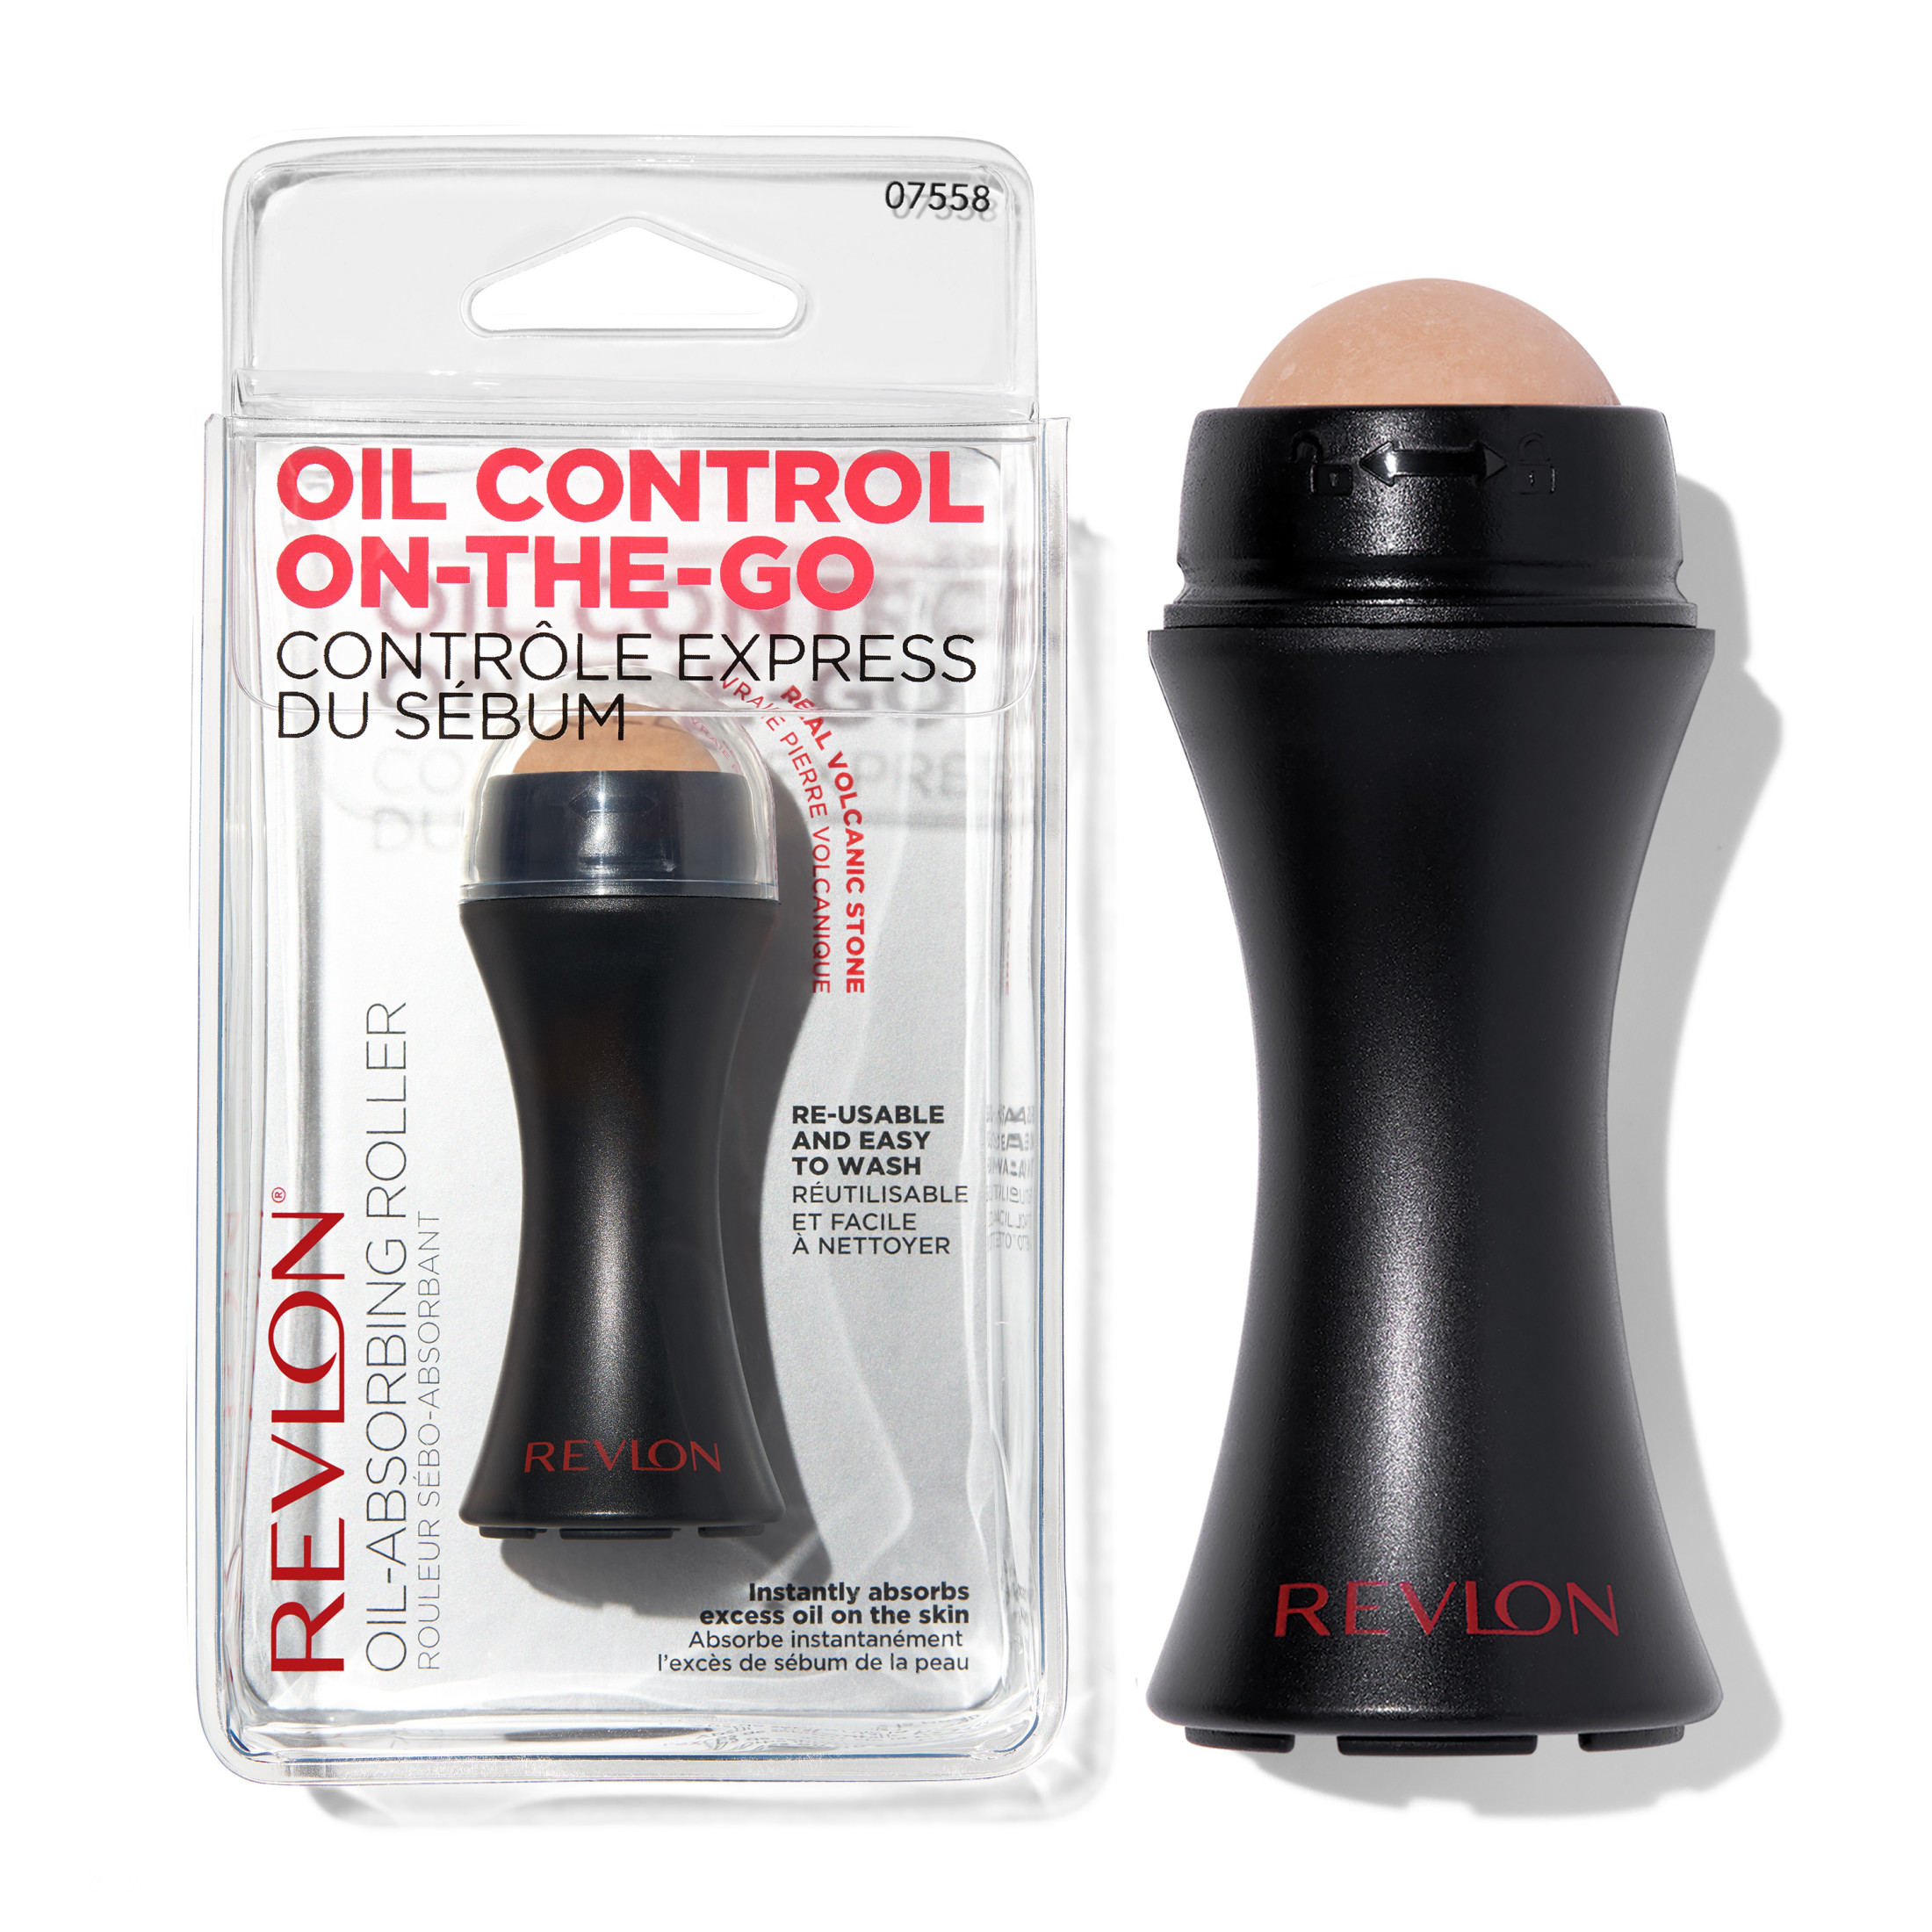 Revlon Oil Control On The Go Portable Oil Absorbing Roller, 1 count - image 1 of 14